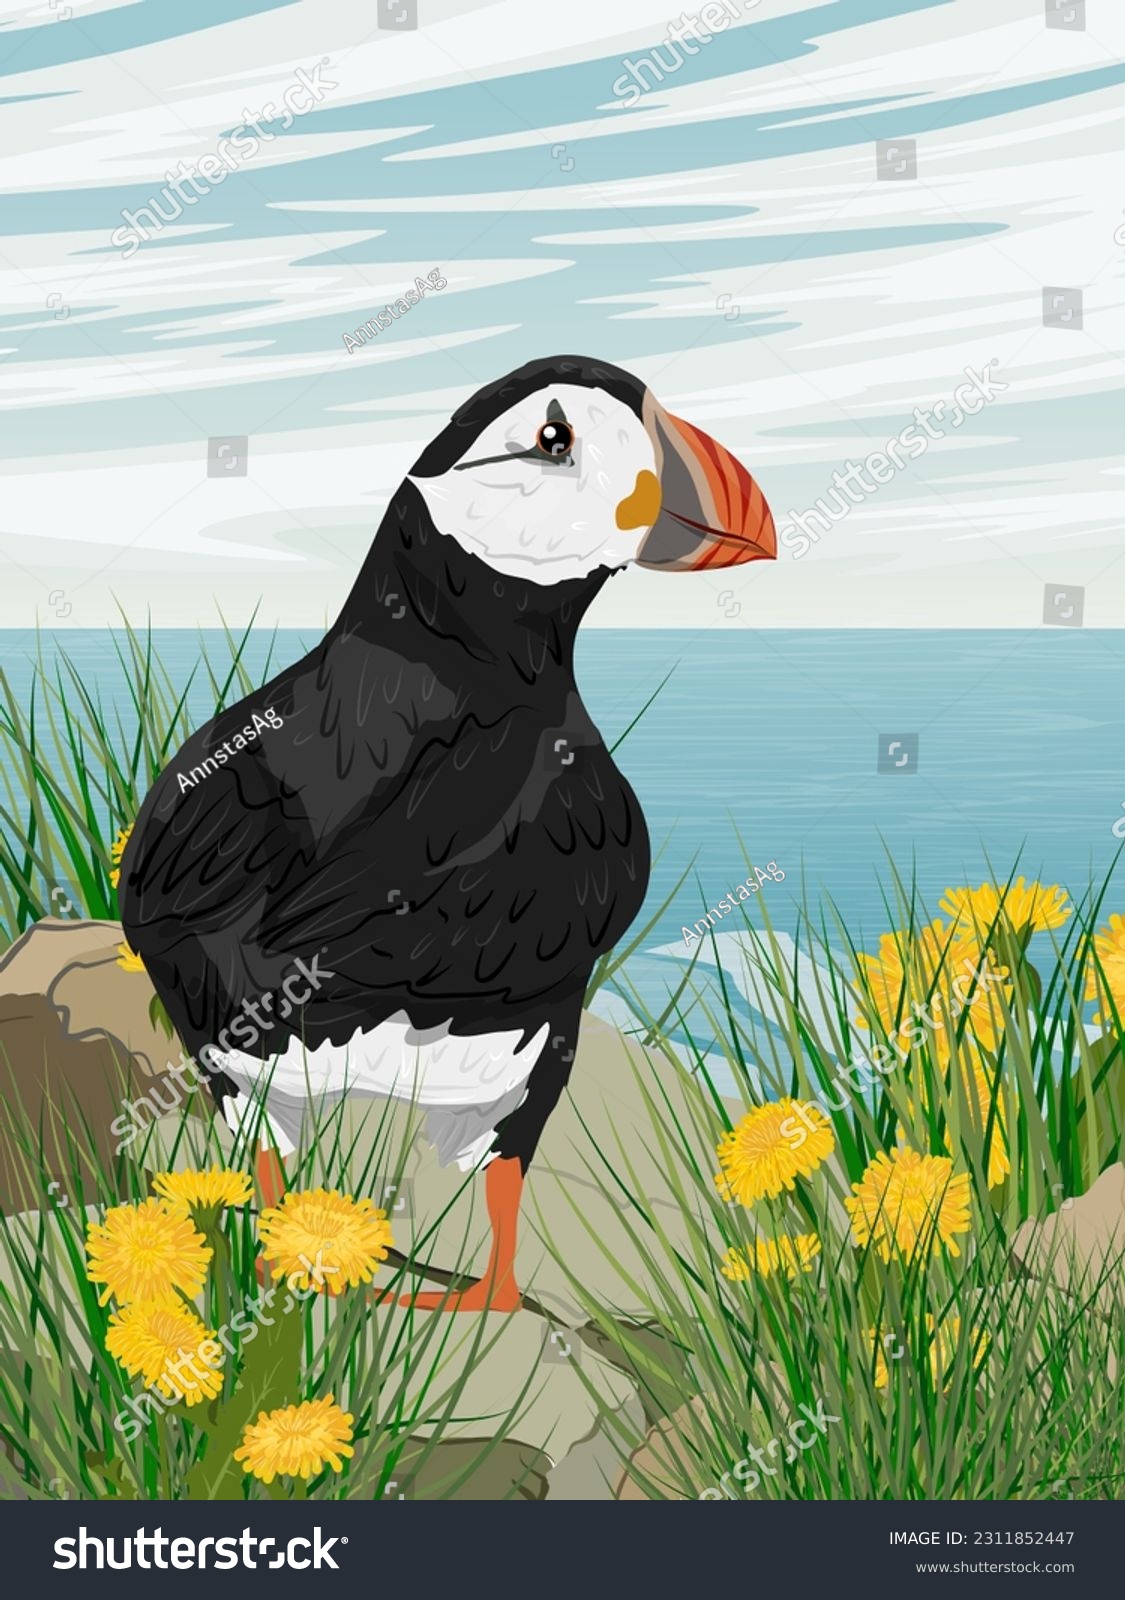 SVG of Atlantic puffin sits on a rocky ocean shore in thickets of grass and yellow flowers. Scandinavian bird Fratercula arctica or common puffin. Realistic vector vertical landscape svg